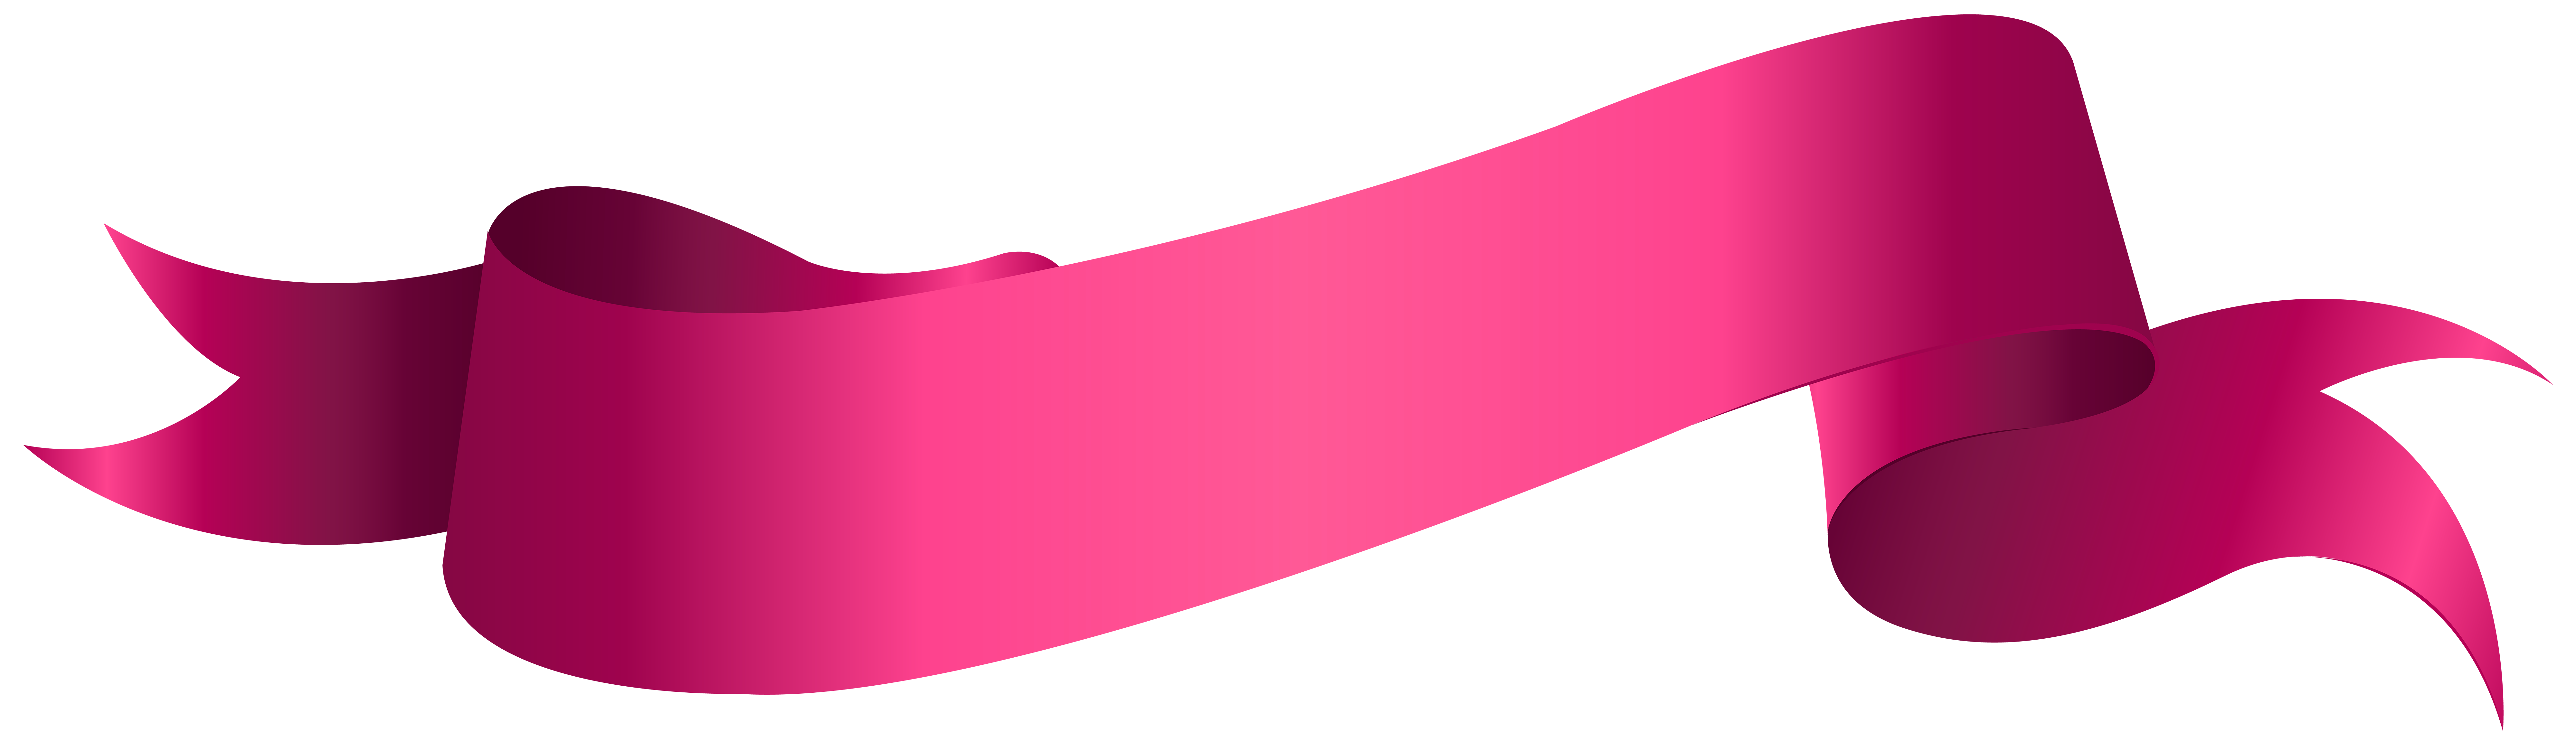 Banner pink png.